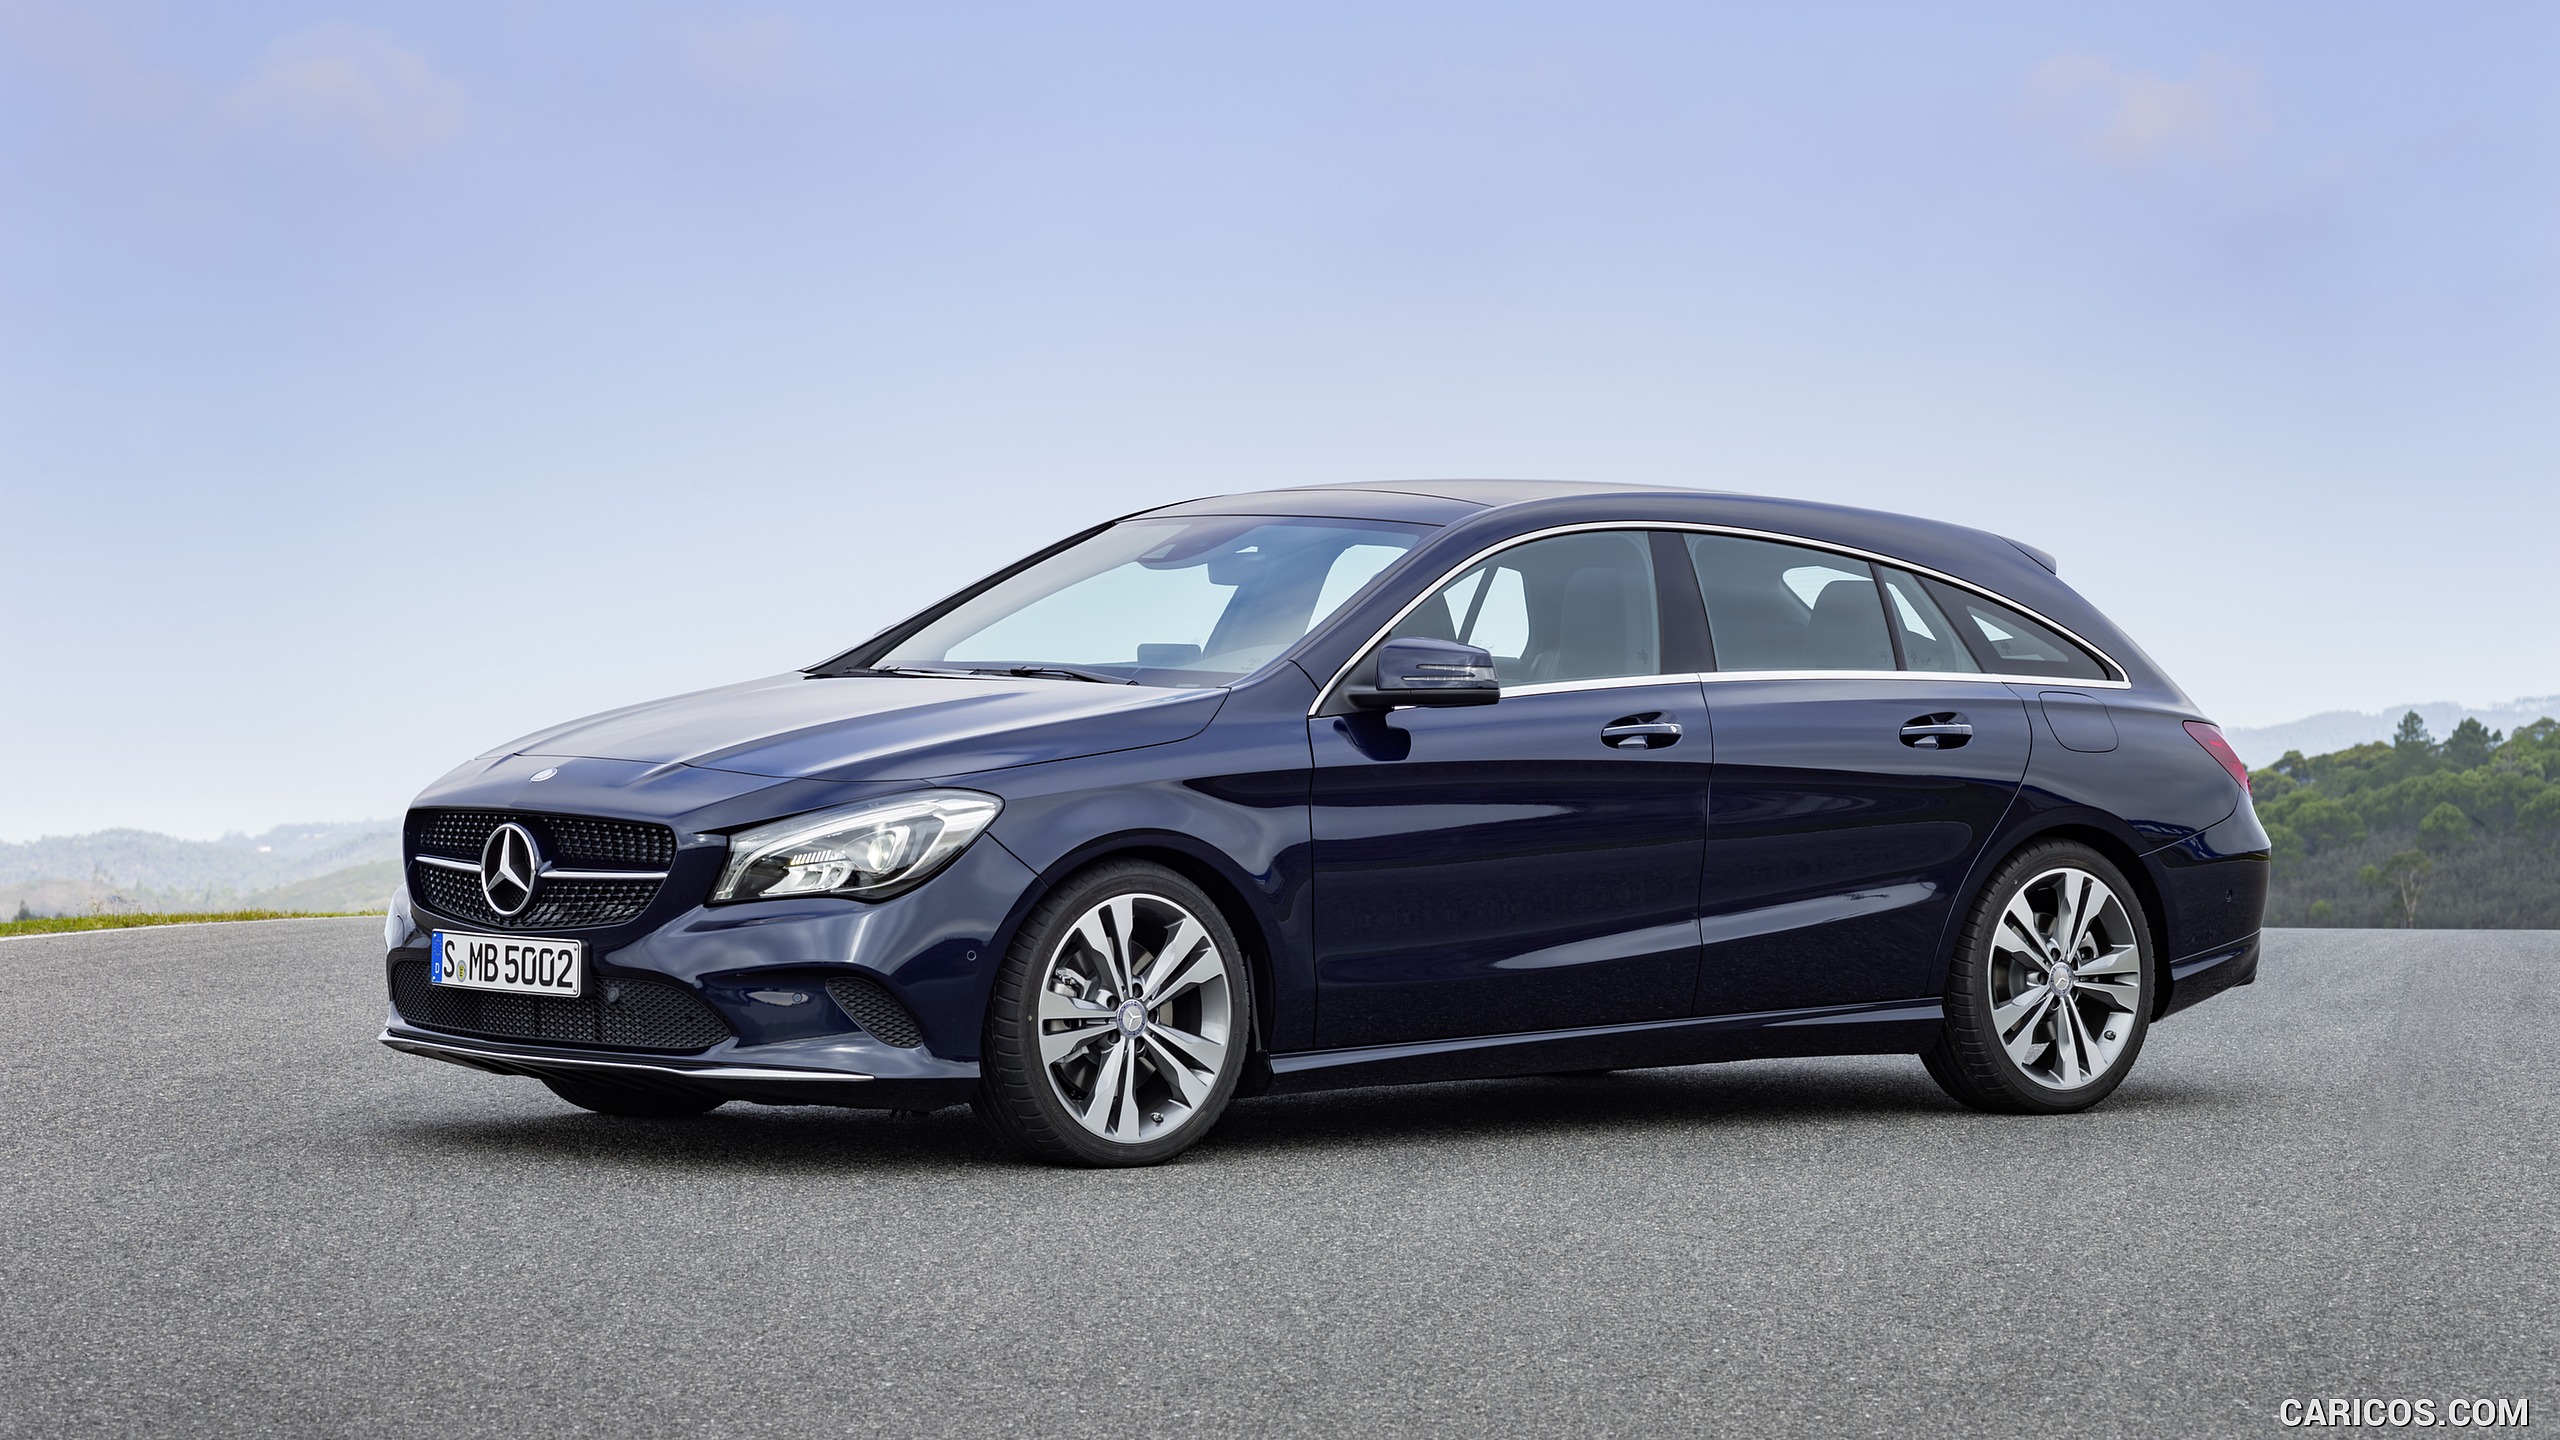 2017 Mercedes-Benz CLA 250 4MATIC Shooting Brake (Chassis: X117, Color: Canvasite blue) - Front, #16 of 19